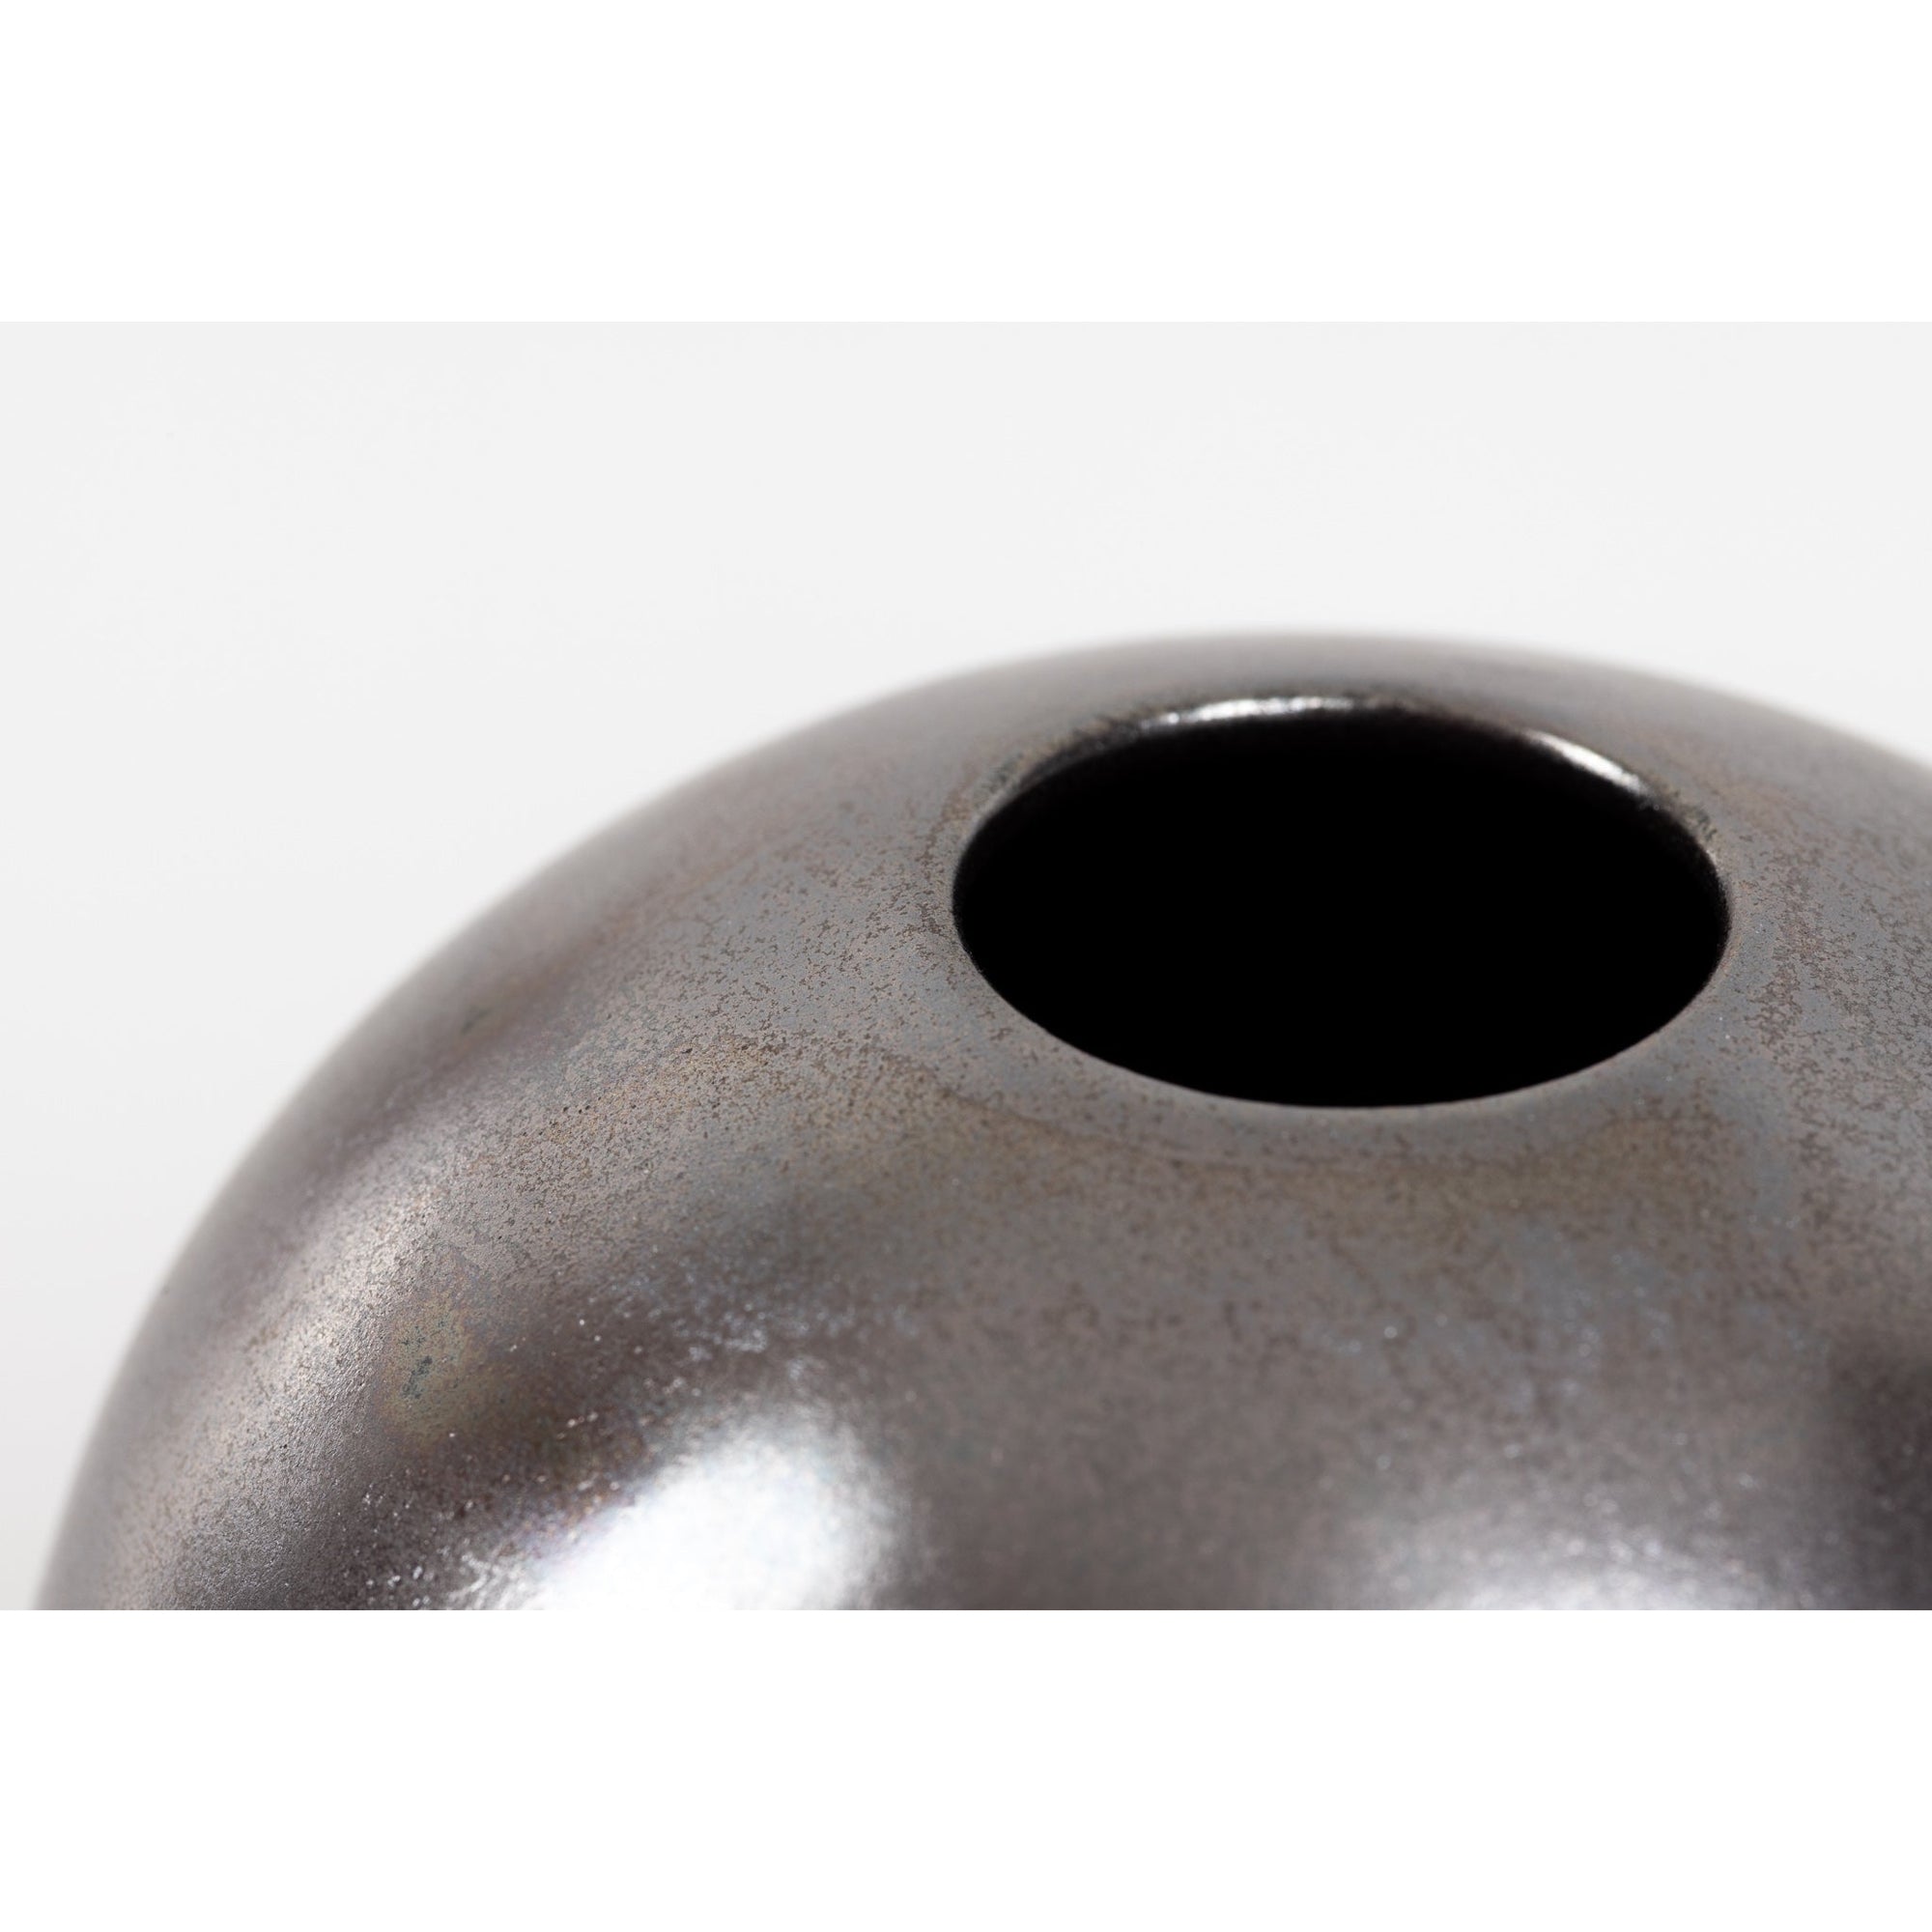 KSG1 Lunar, Stoneware Vase by Kate Schuricht, available at Padstow Gallery, Cornwall